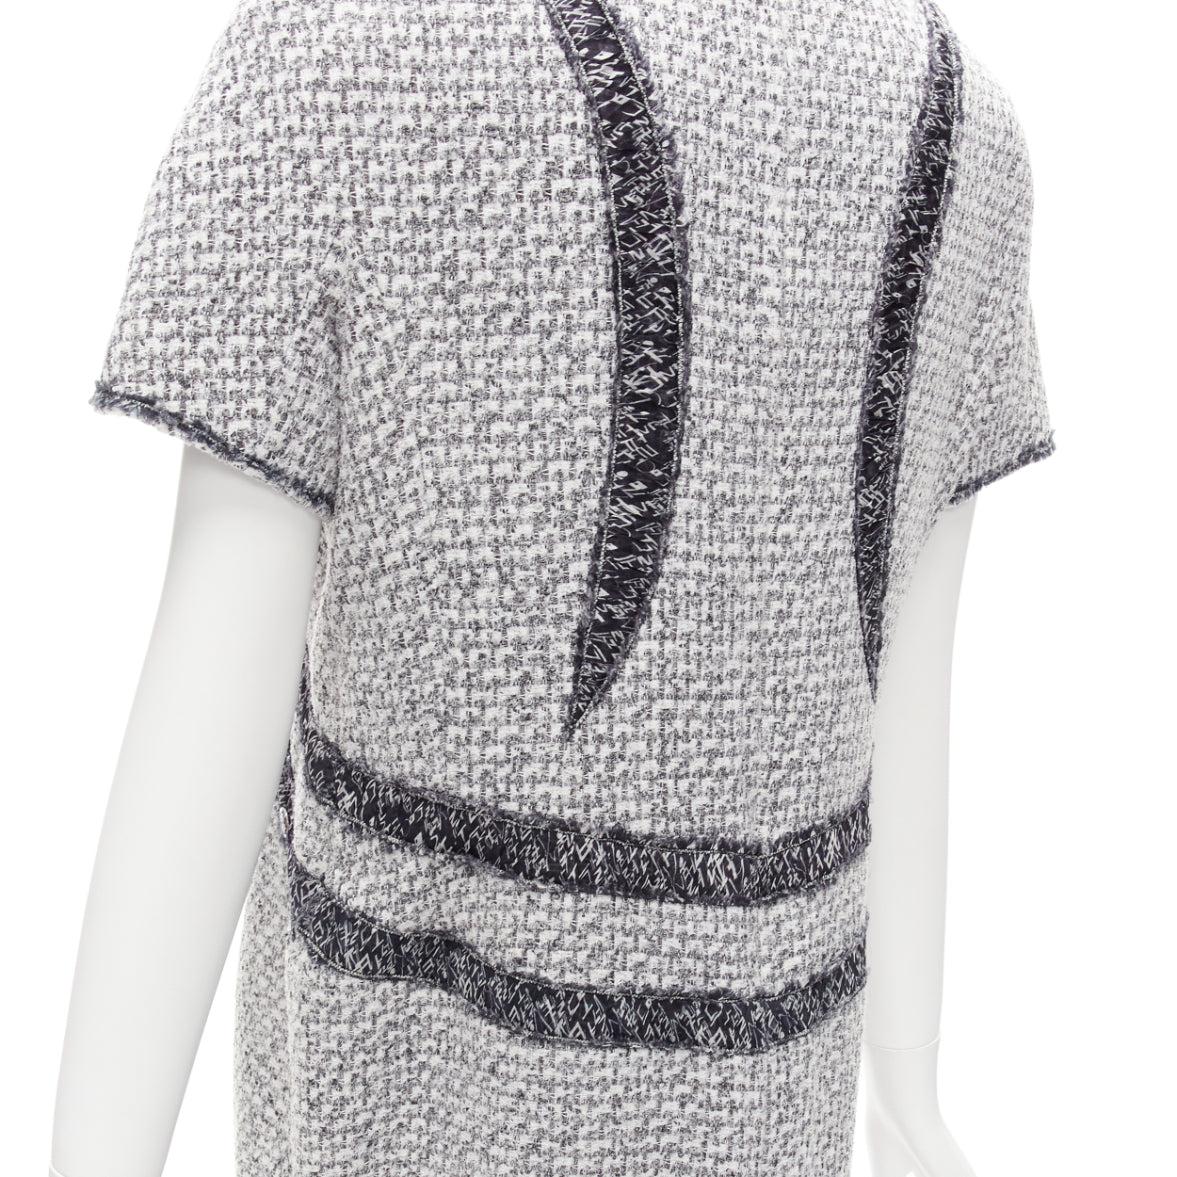 CHANEL 13P grey graphic panels Fantasy Tweed shift dress FR46 3XL For Sale 1